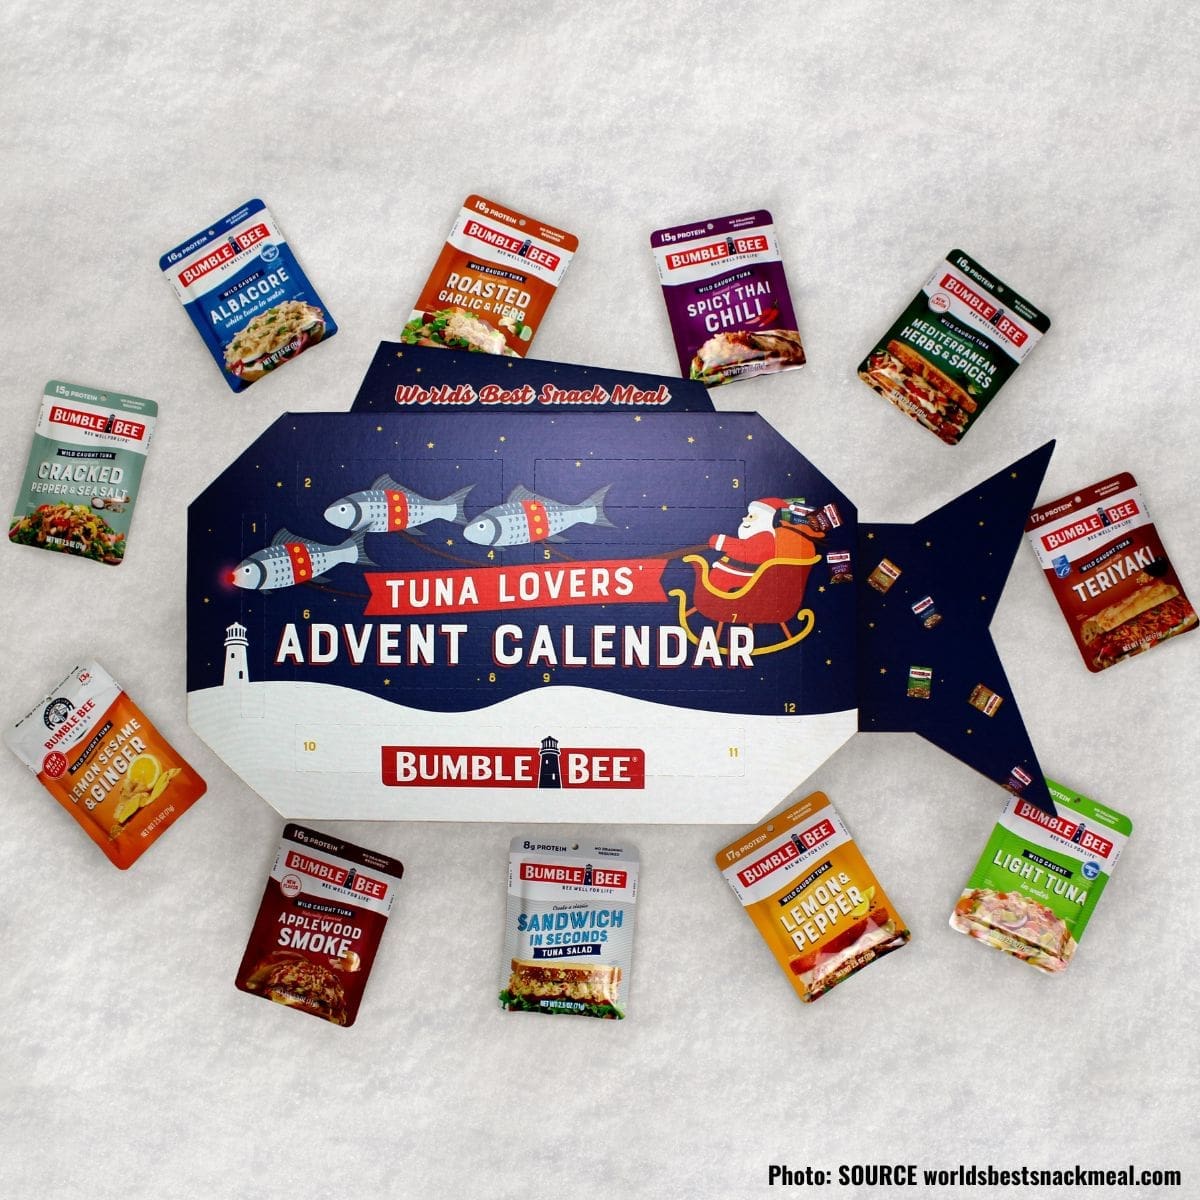 The image shows a box shaped like a fish with12-day advent calendar  from Bumble Bee Seafoods!